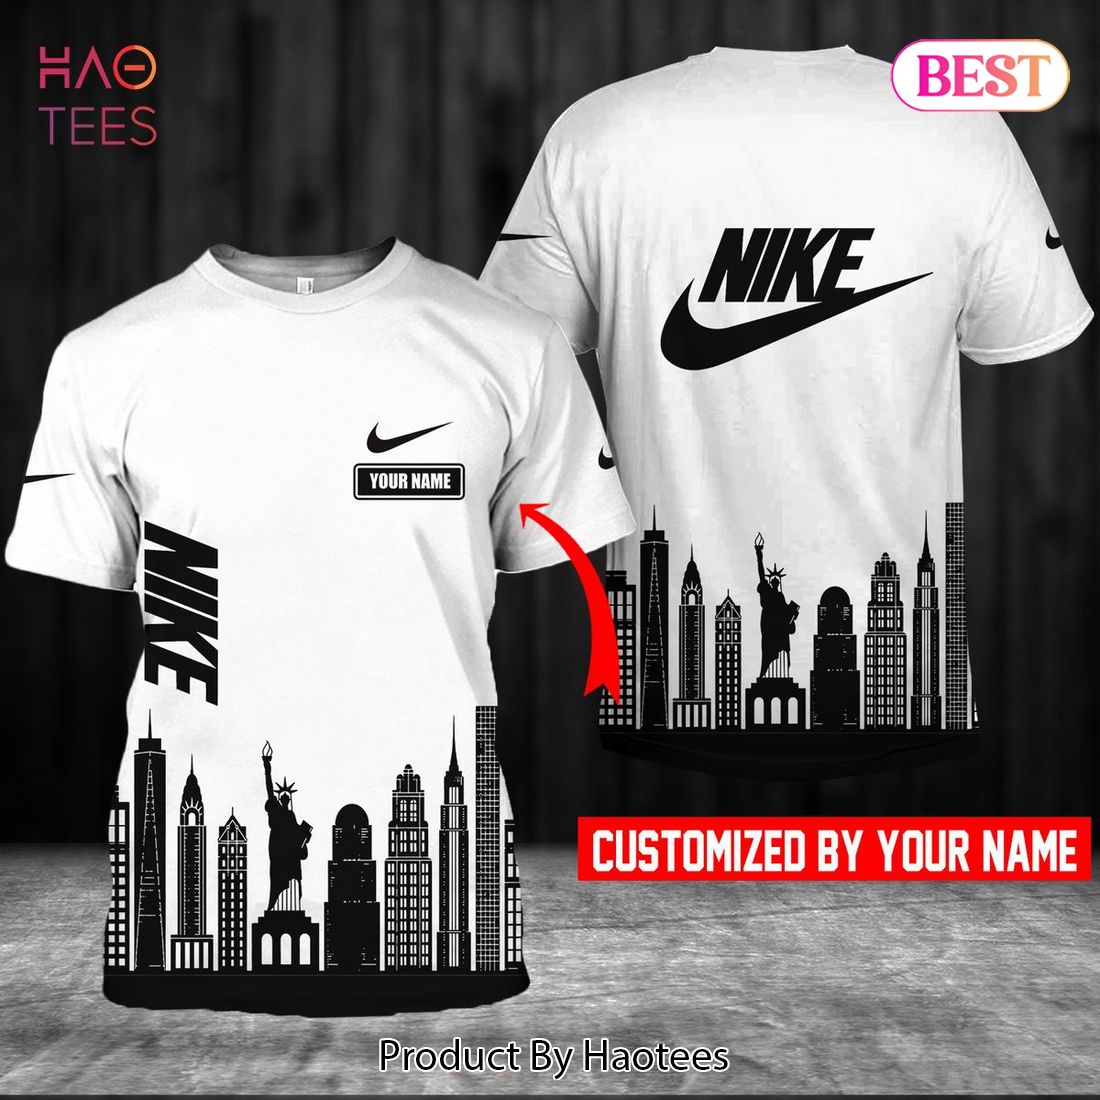 THE BEST Nike Black Mix White Luxury Brand 3D T-Shirt Limited Edition